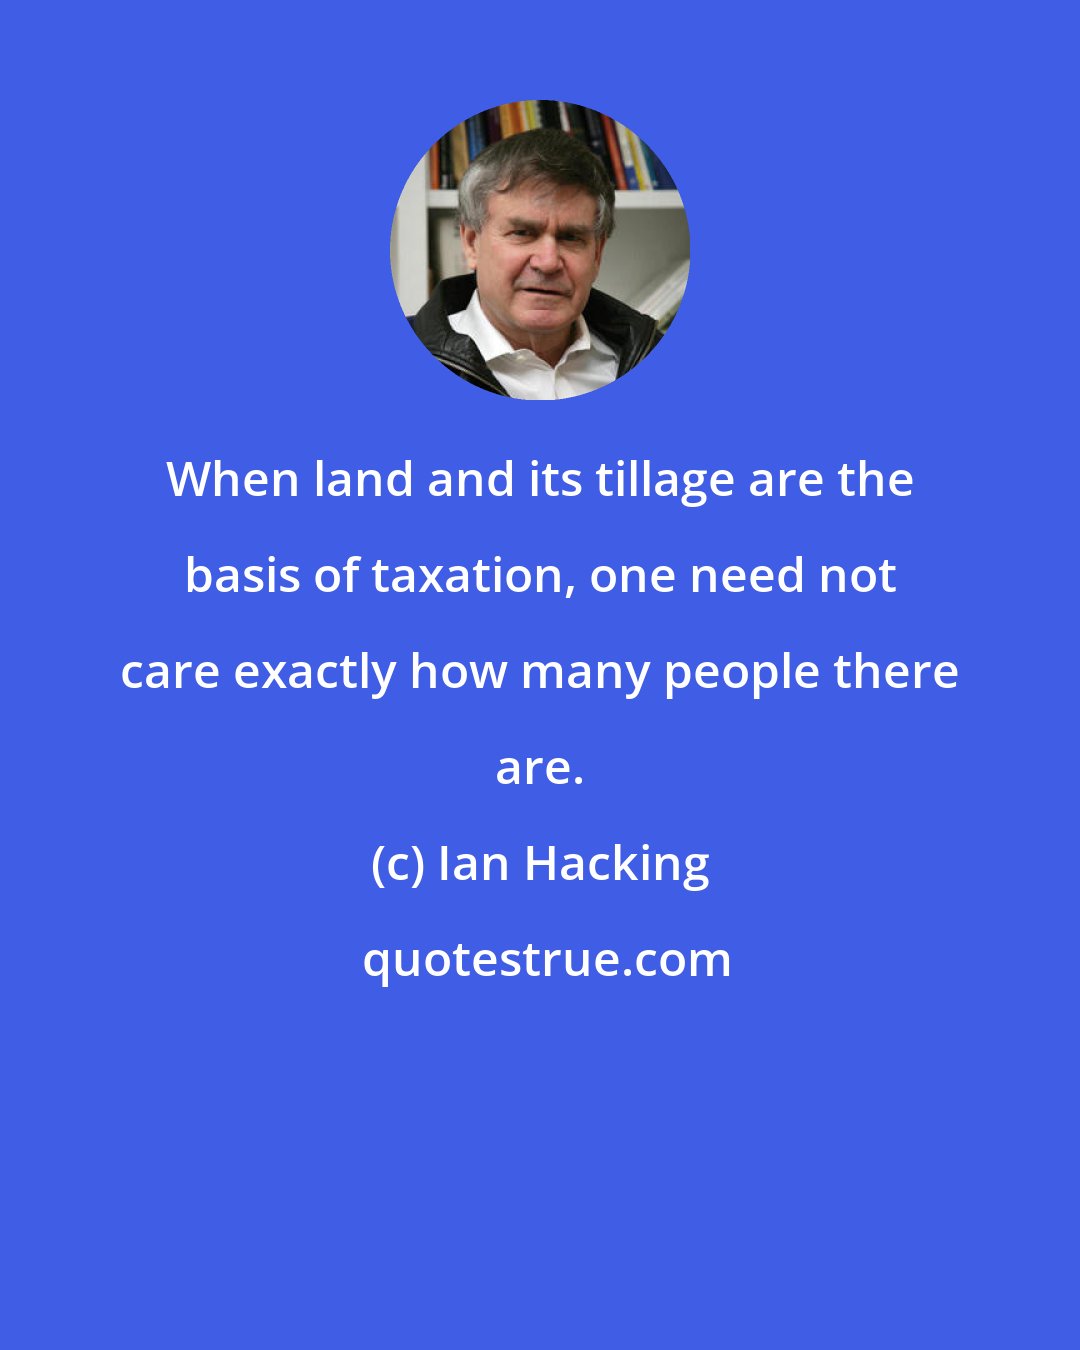 Ian Hacking: When land and its tillage are the basis of taxation, one need not care exactly how many people there are.